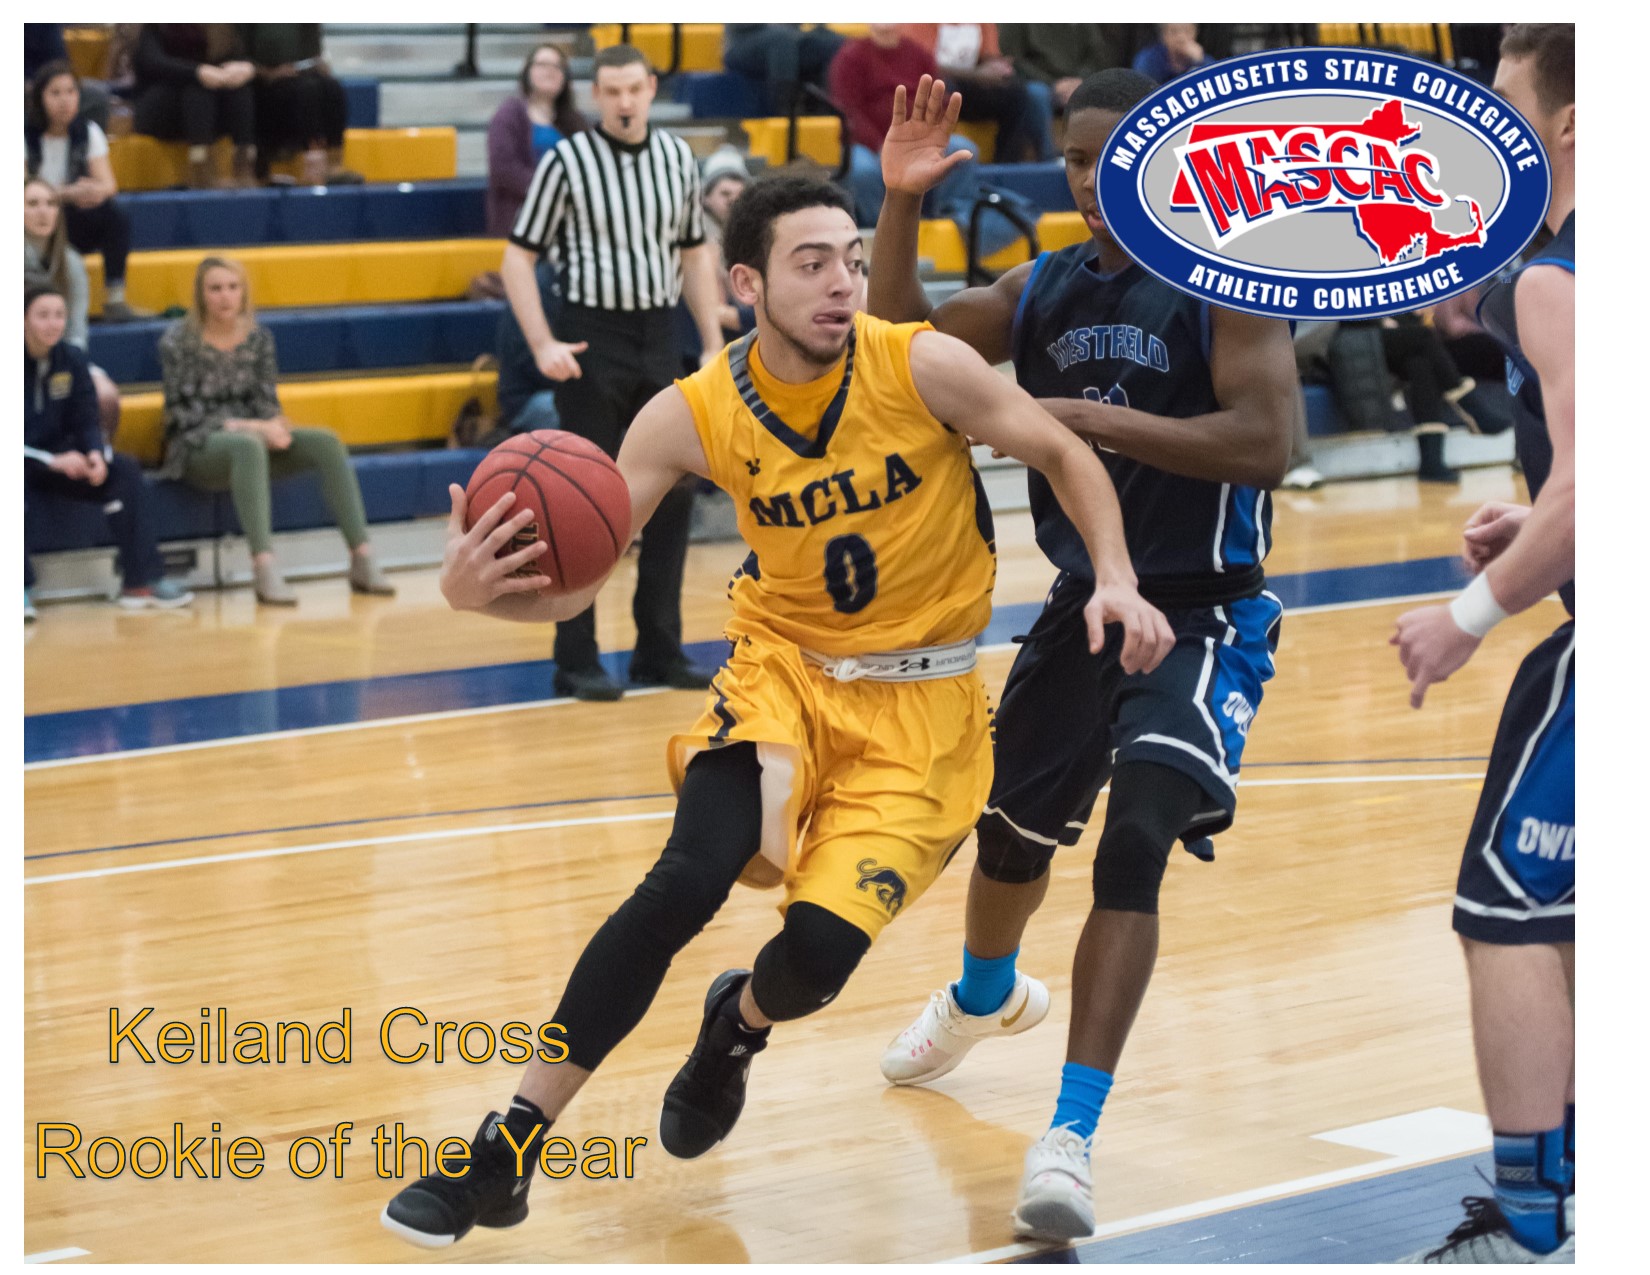 Cross named MASCAC rookie of the year